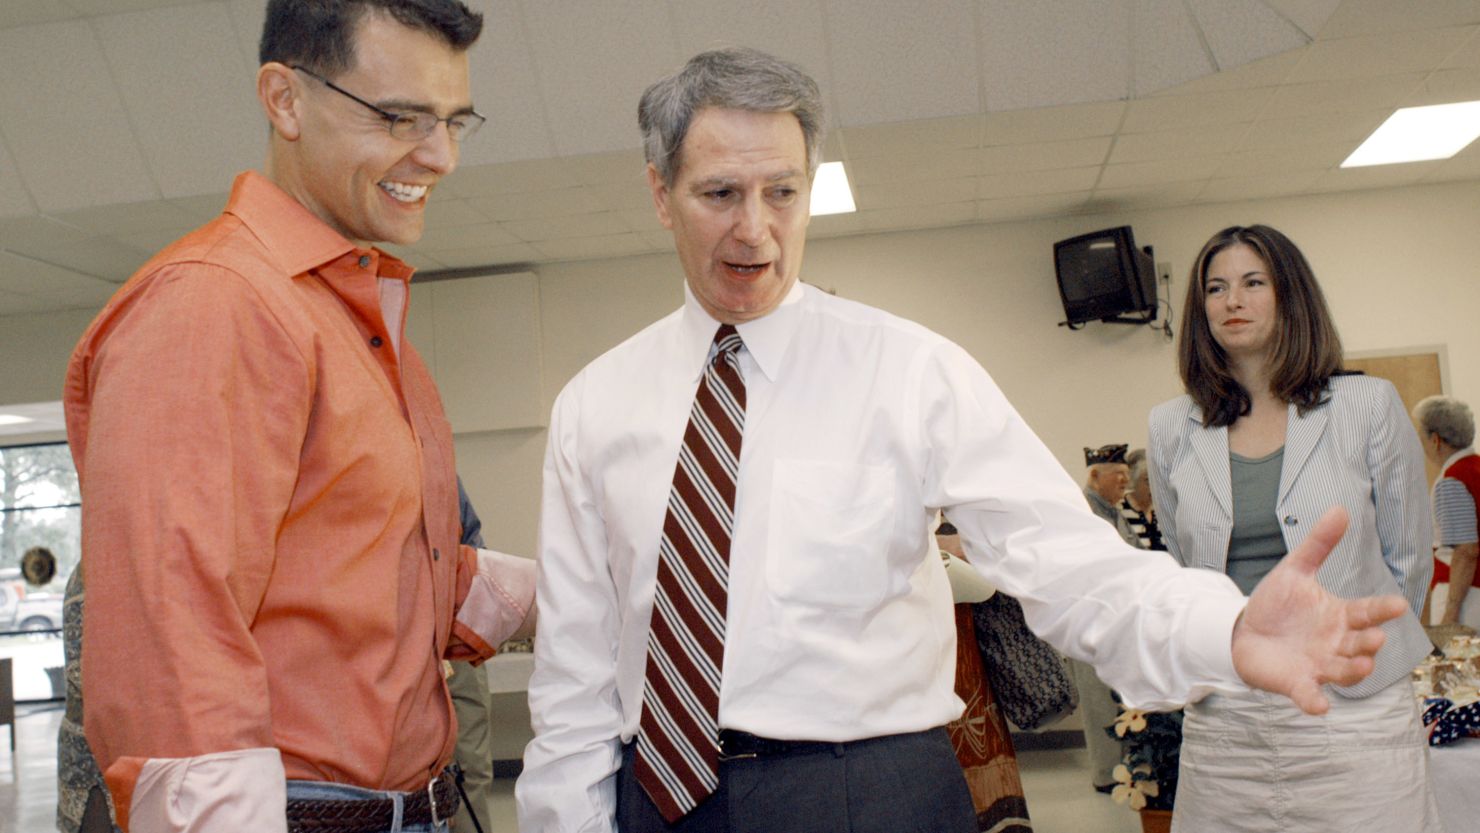 Some political observers believe Rep. Walter Jones, pictured right, is facing his toughest challenge yet in this year's primary.